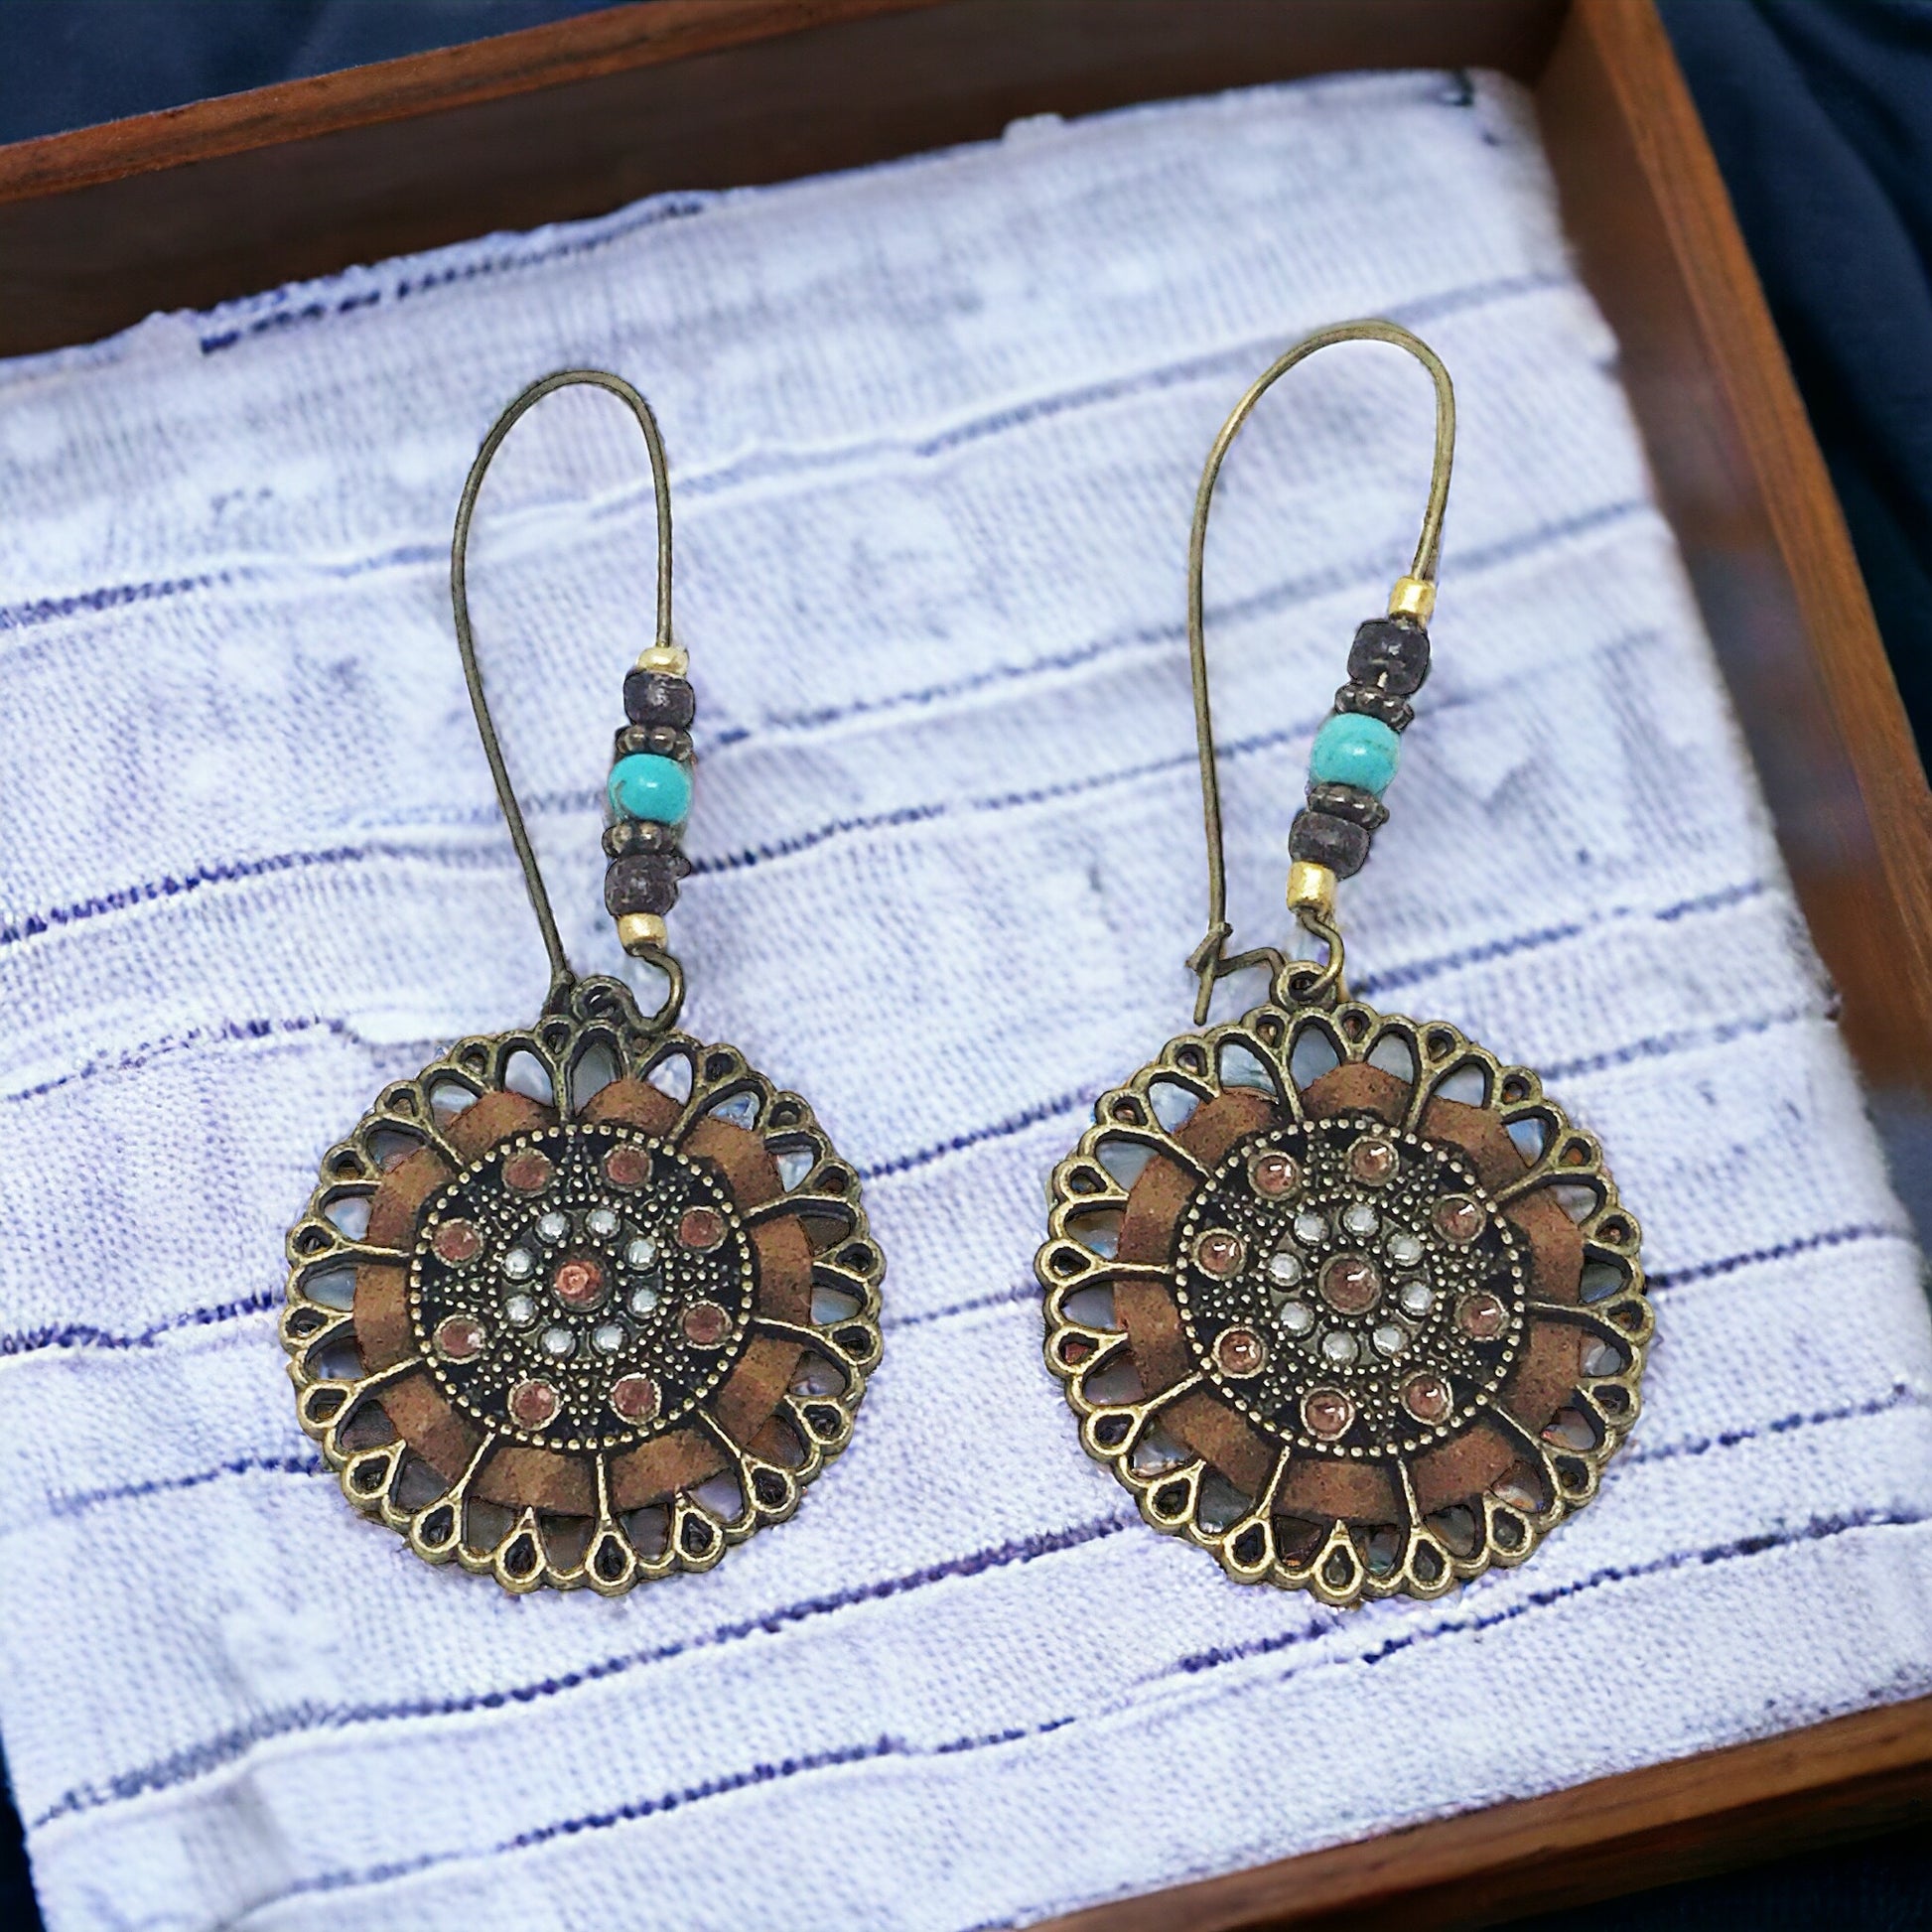 Boho Beaded Round Dangle Earrings with Suede Accents - Stylish & Unique Accessories